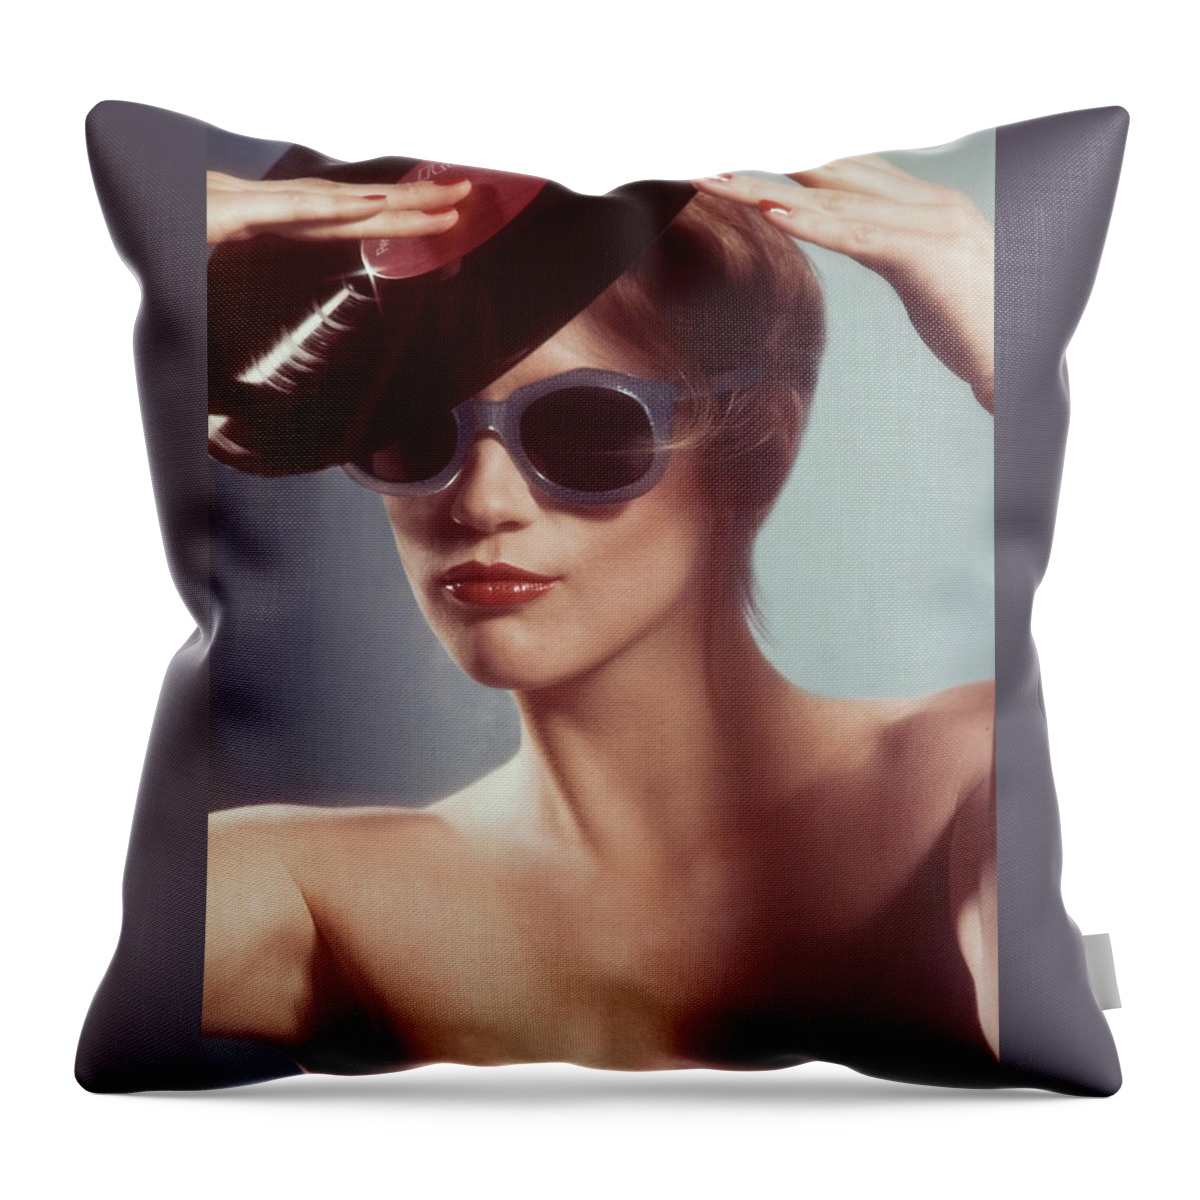 Vinyl Throw Pillow featuring the photograph Vinyl Record Hat 1983 by Steve Ladner